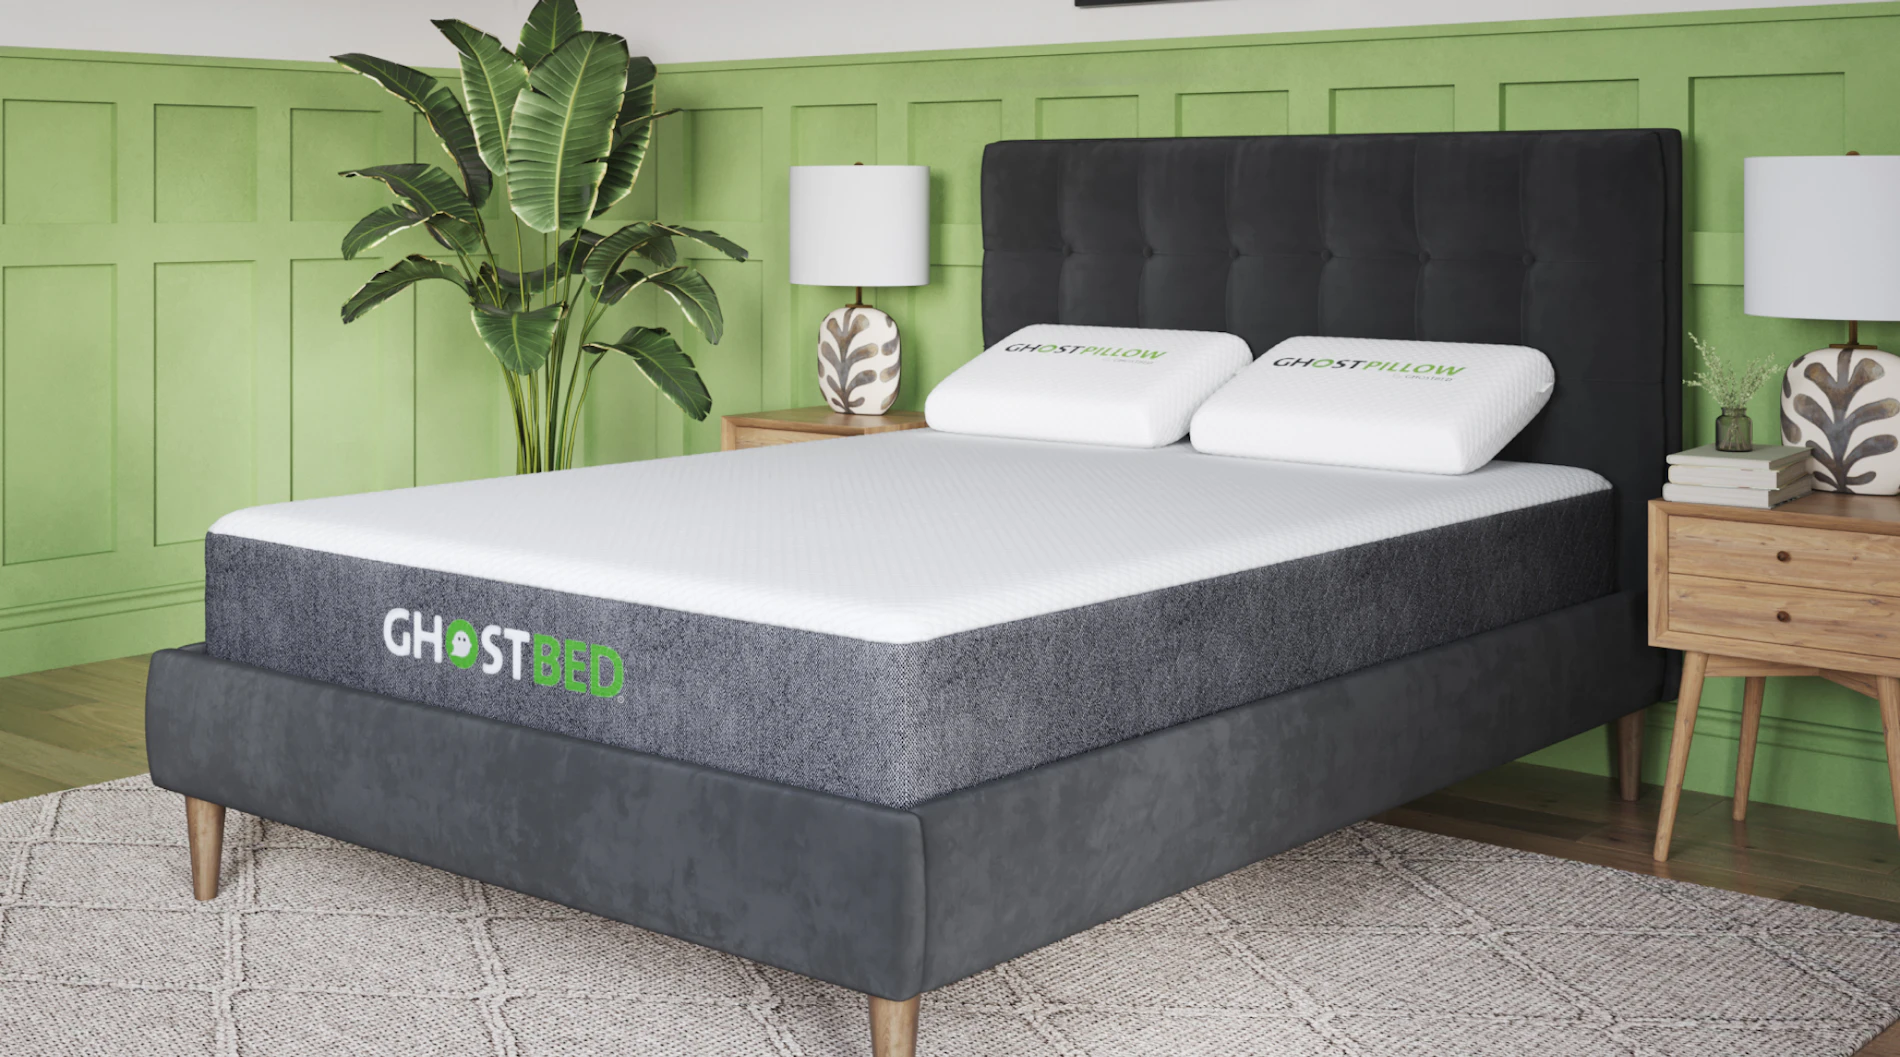 Compare GhostBed and Lull mattresses